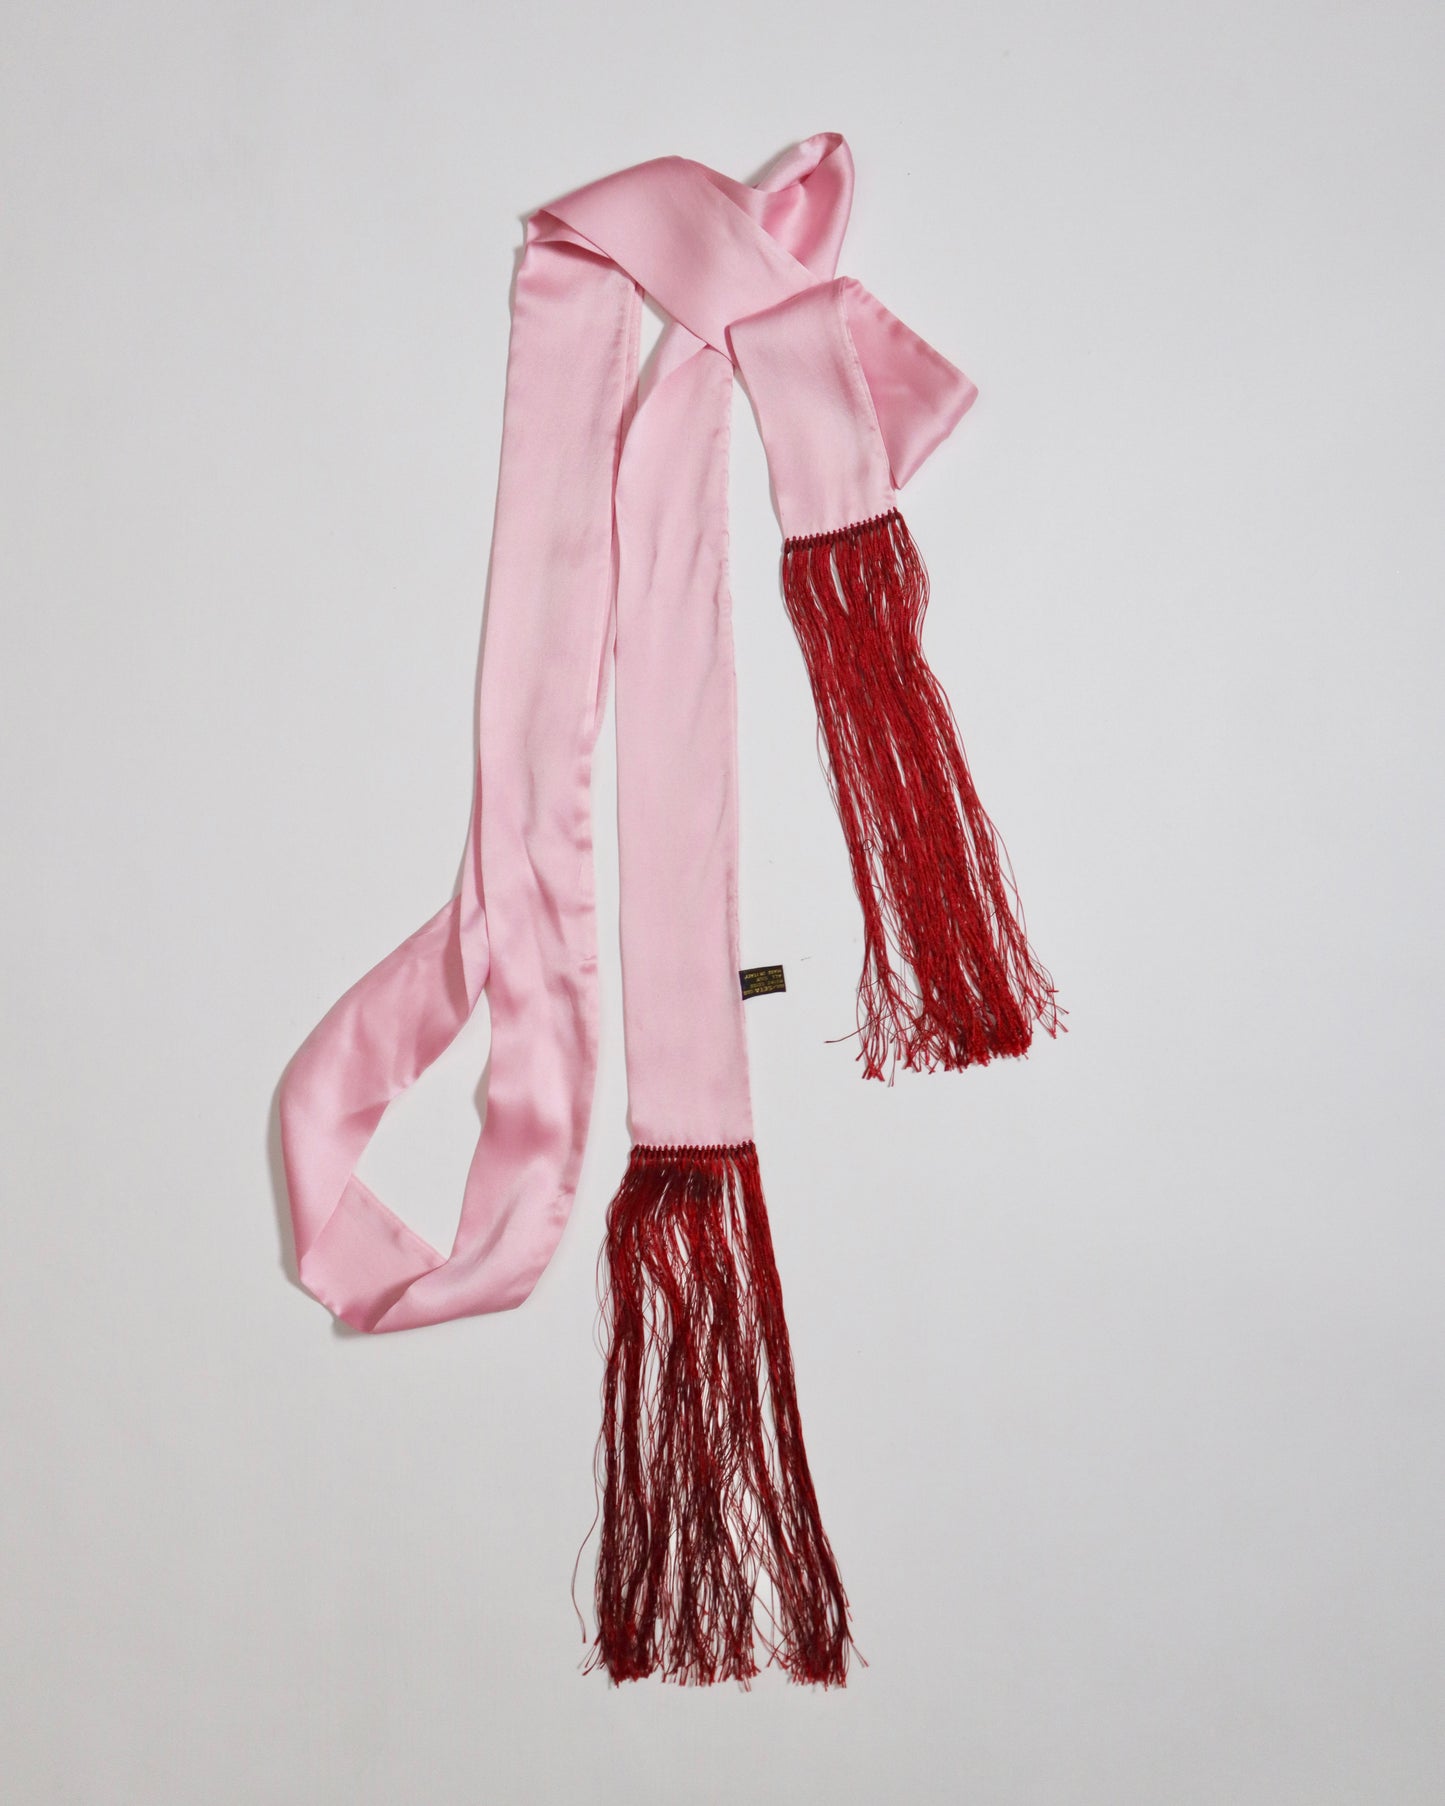 Dior A/W 2005 'In the Morning' Runway Scarf